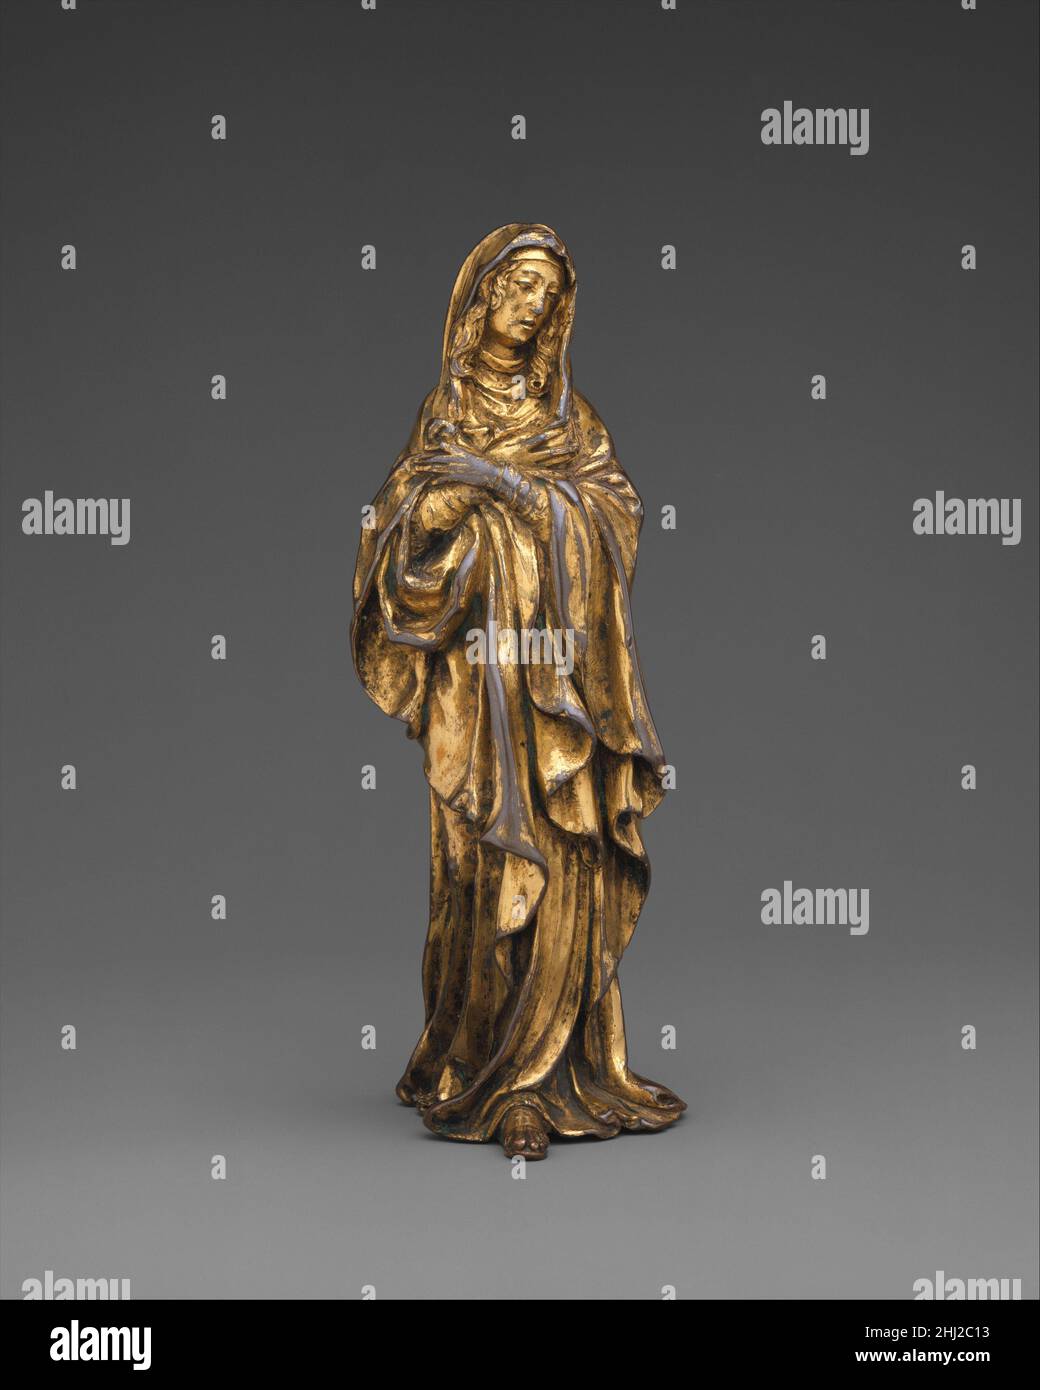 The Virgin Mary ca. 1585–90 Manner of Germain Pilon French This figure comes from a Crucifixion group in which the Virgin and Saint John the Evangelist would have flanked Christ on the Cross. The slender proportions and flowing drapery folds relate closely to Germain Pilon’s Mourning Virgin (ca. 1585), commissioned by Catherine de Médicis (1519–1589) for her funerary chapel at Saint-Denis.. The Virgin Mary  209328 Stock Photo